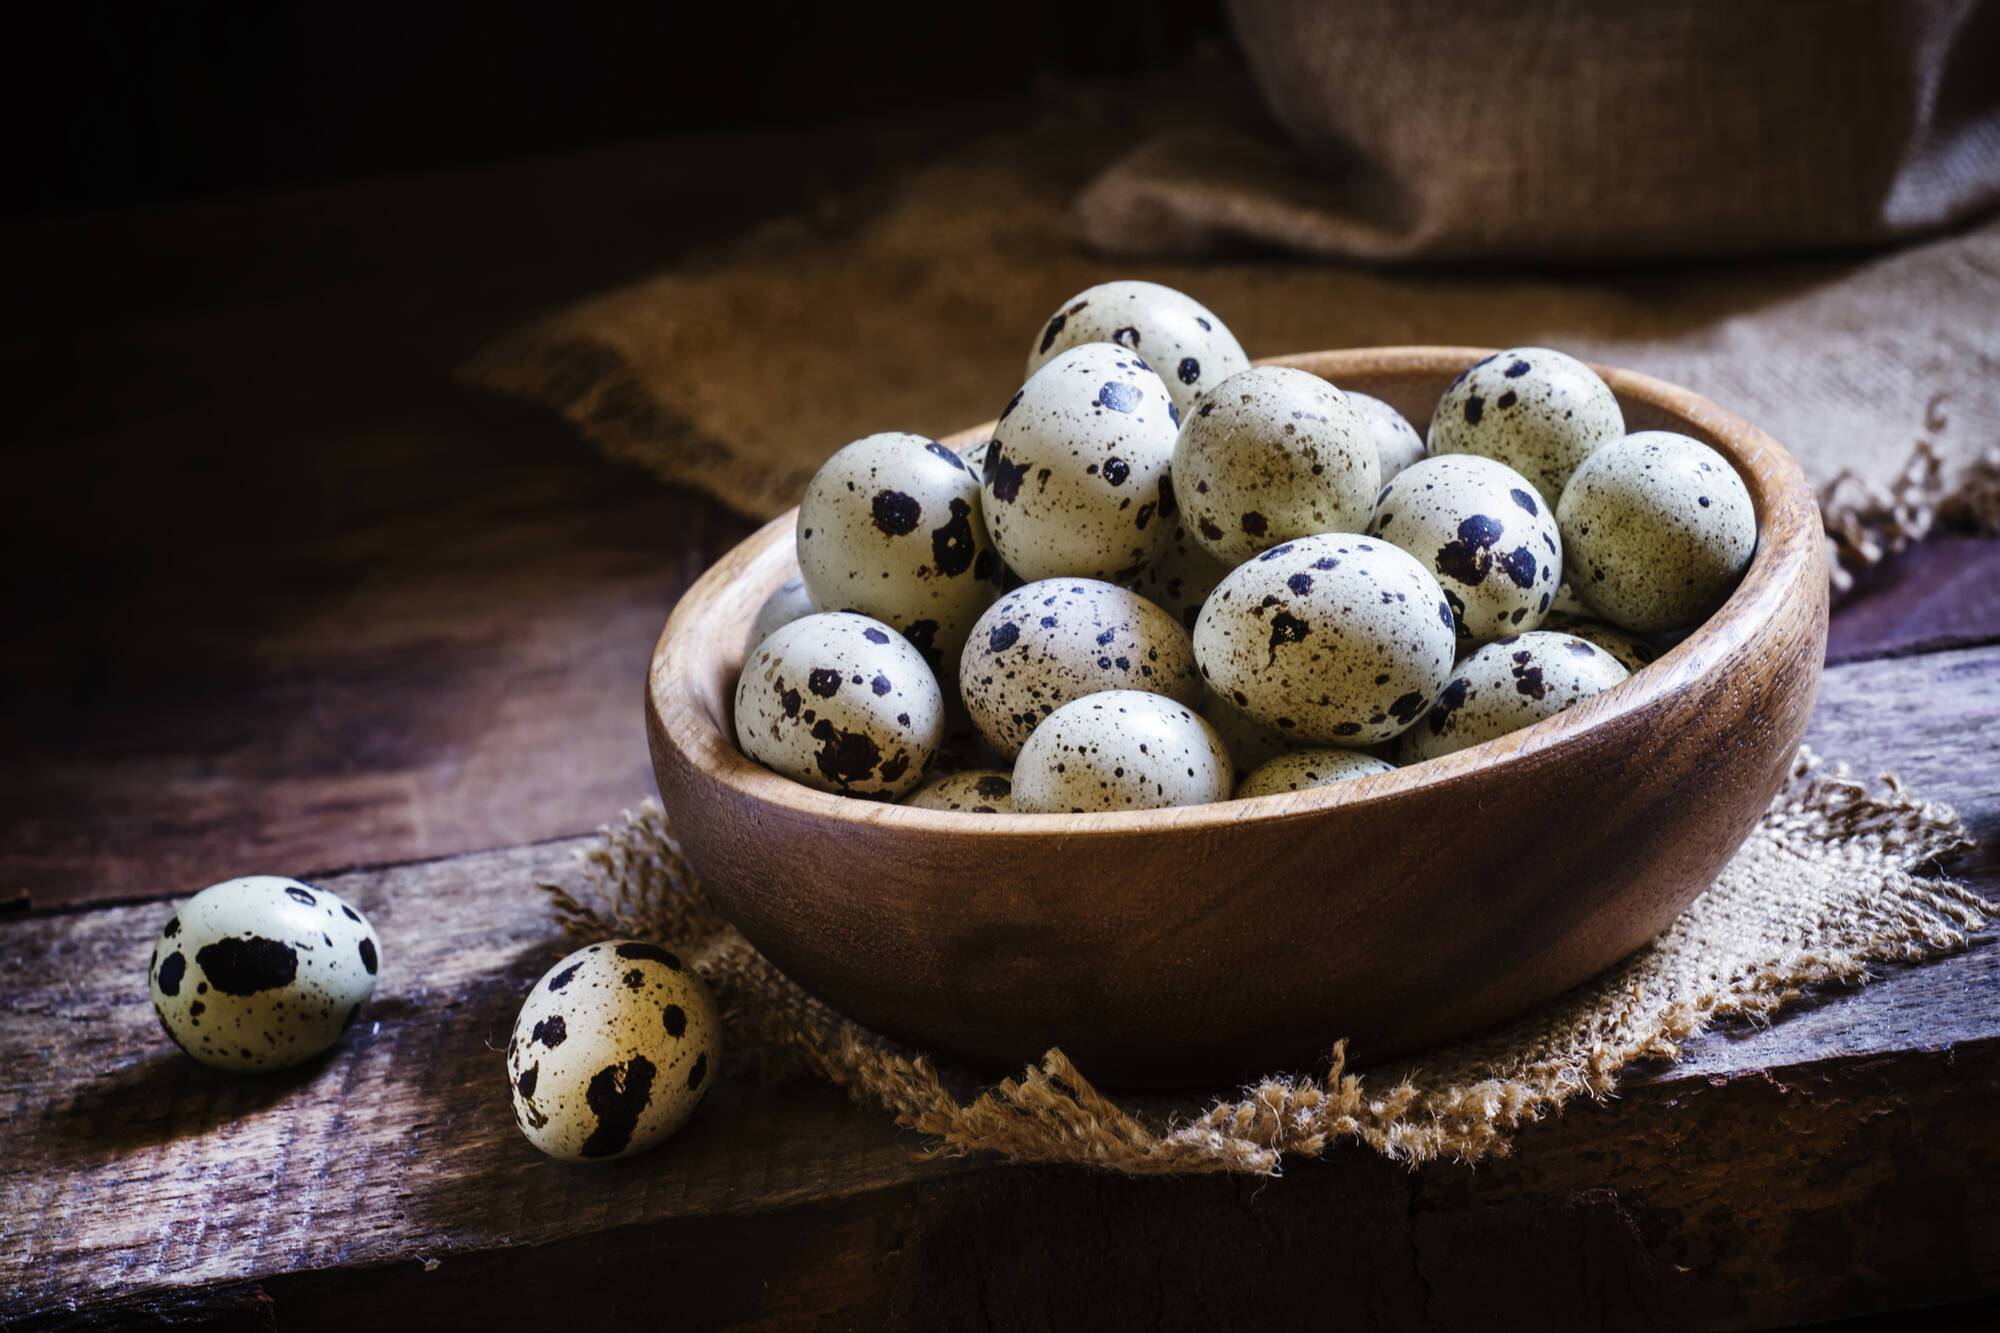 Quail eggs: 5 reasons why they should be included in the diet